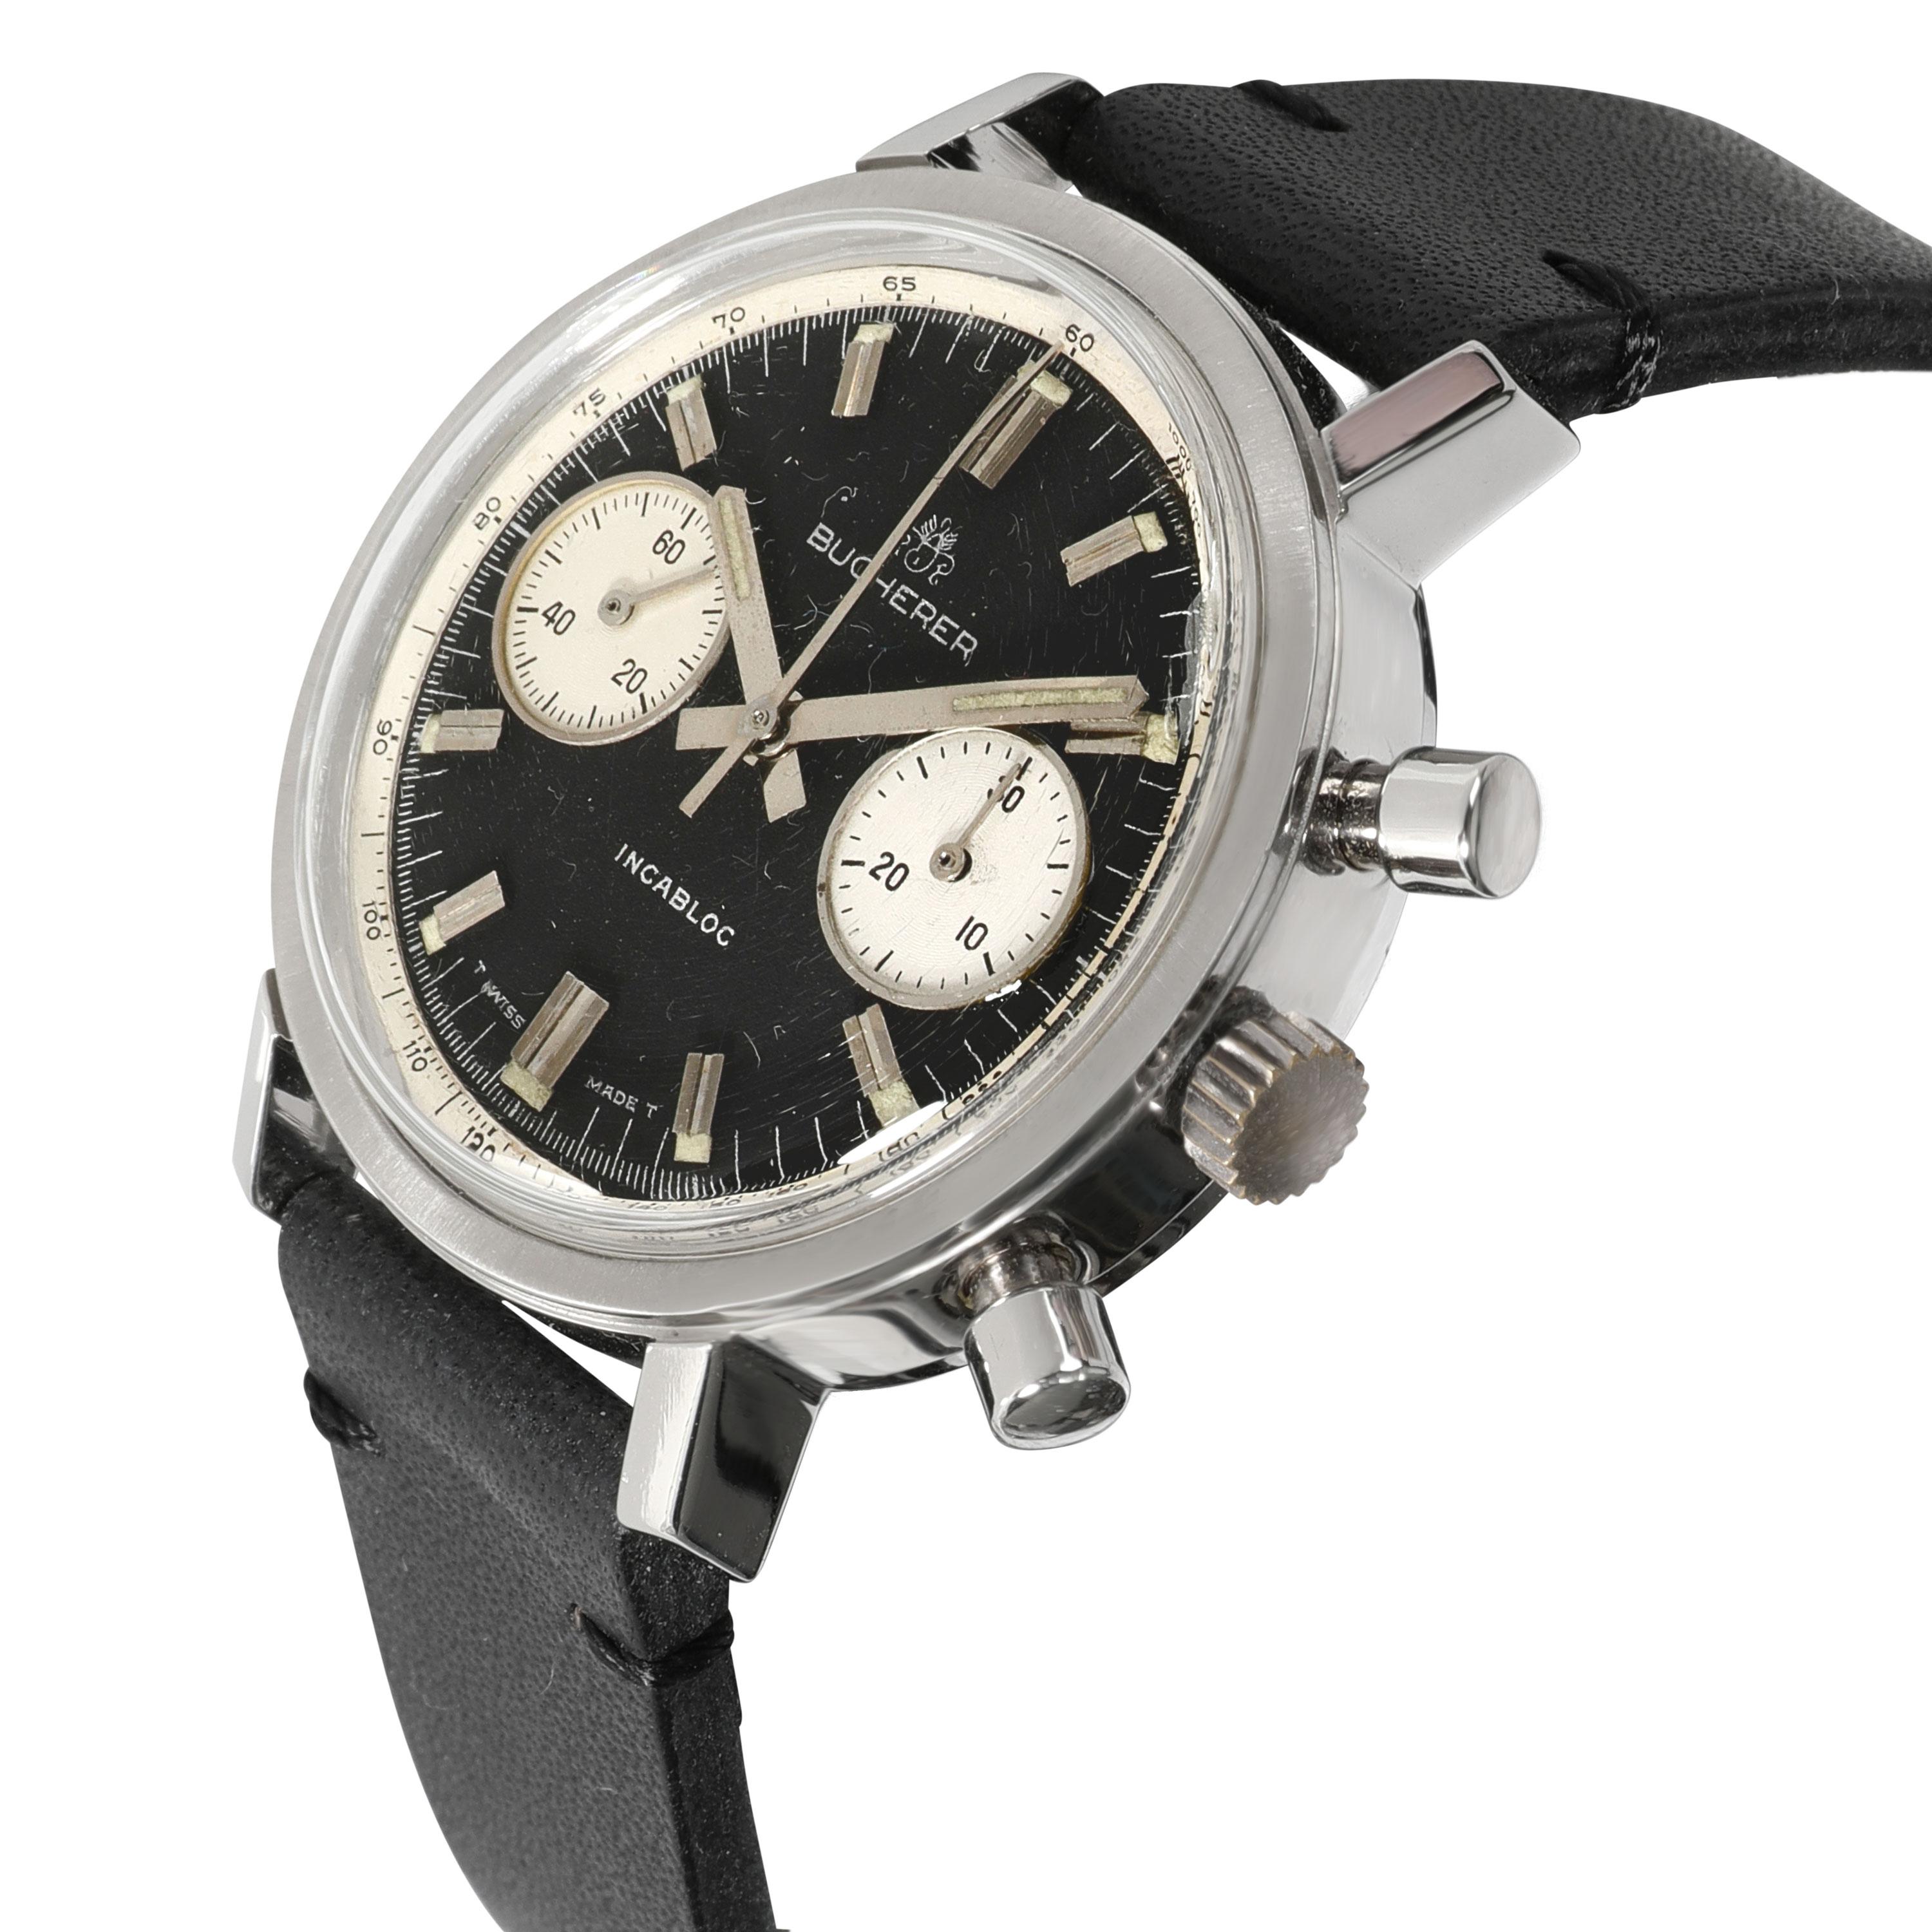 Bucherer Chrono Chrono Men's Vintage Watch in Stainless Steel For Sale ...